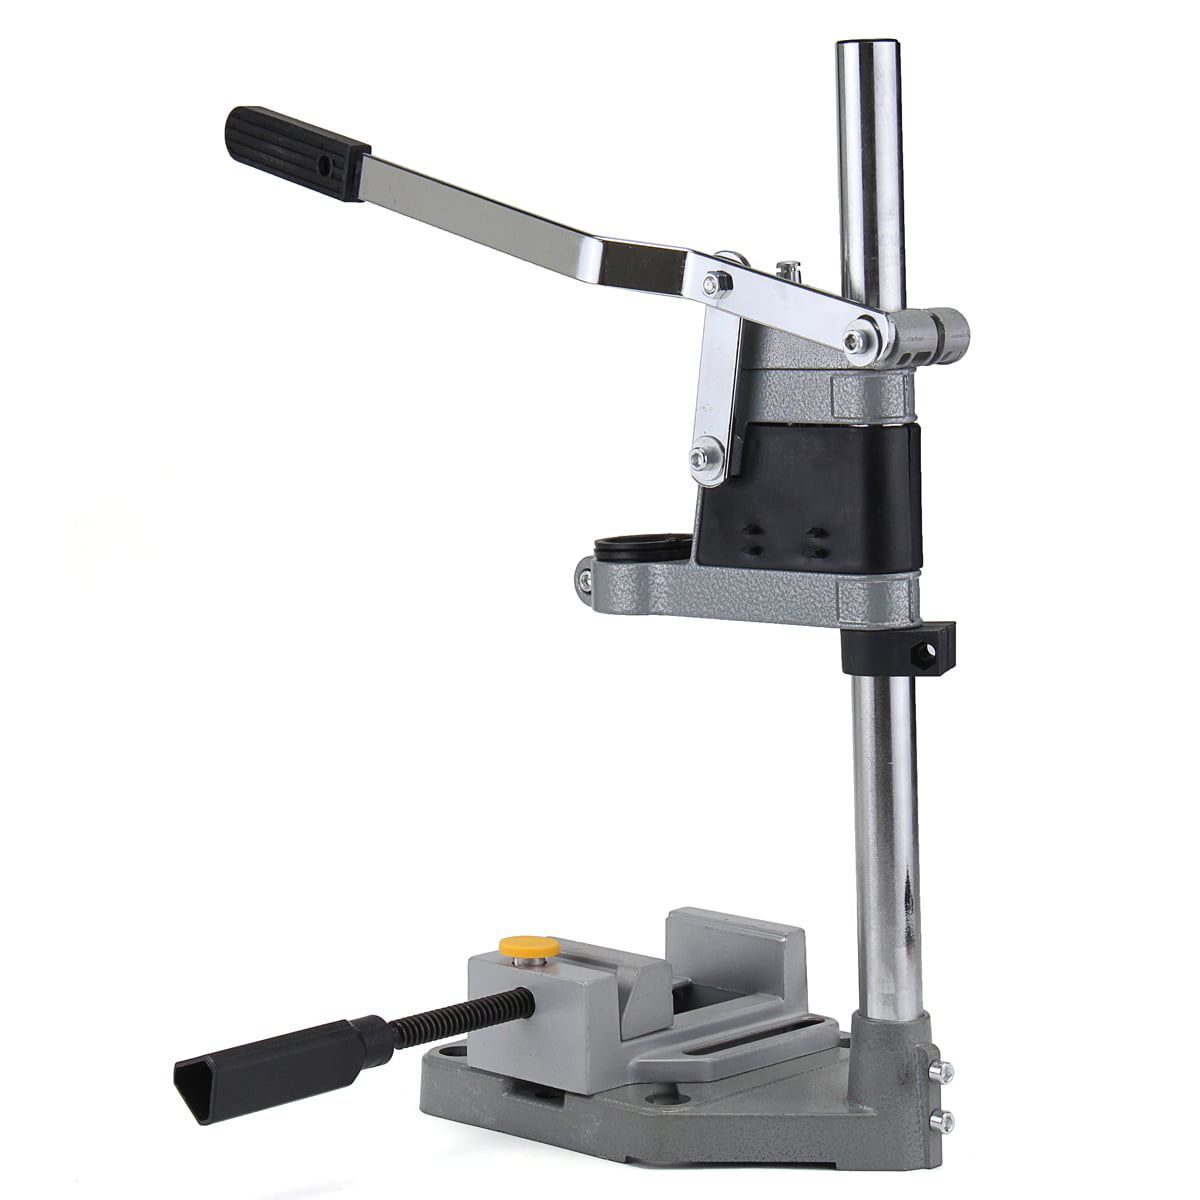 DRILL PRESS VICE PLUNGE POWER DRILLING STAND BENCH PILLAR PEDESTAL CLAMP 